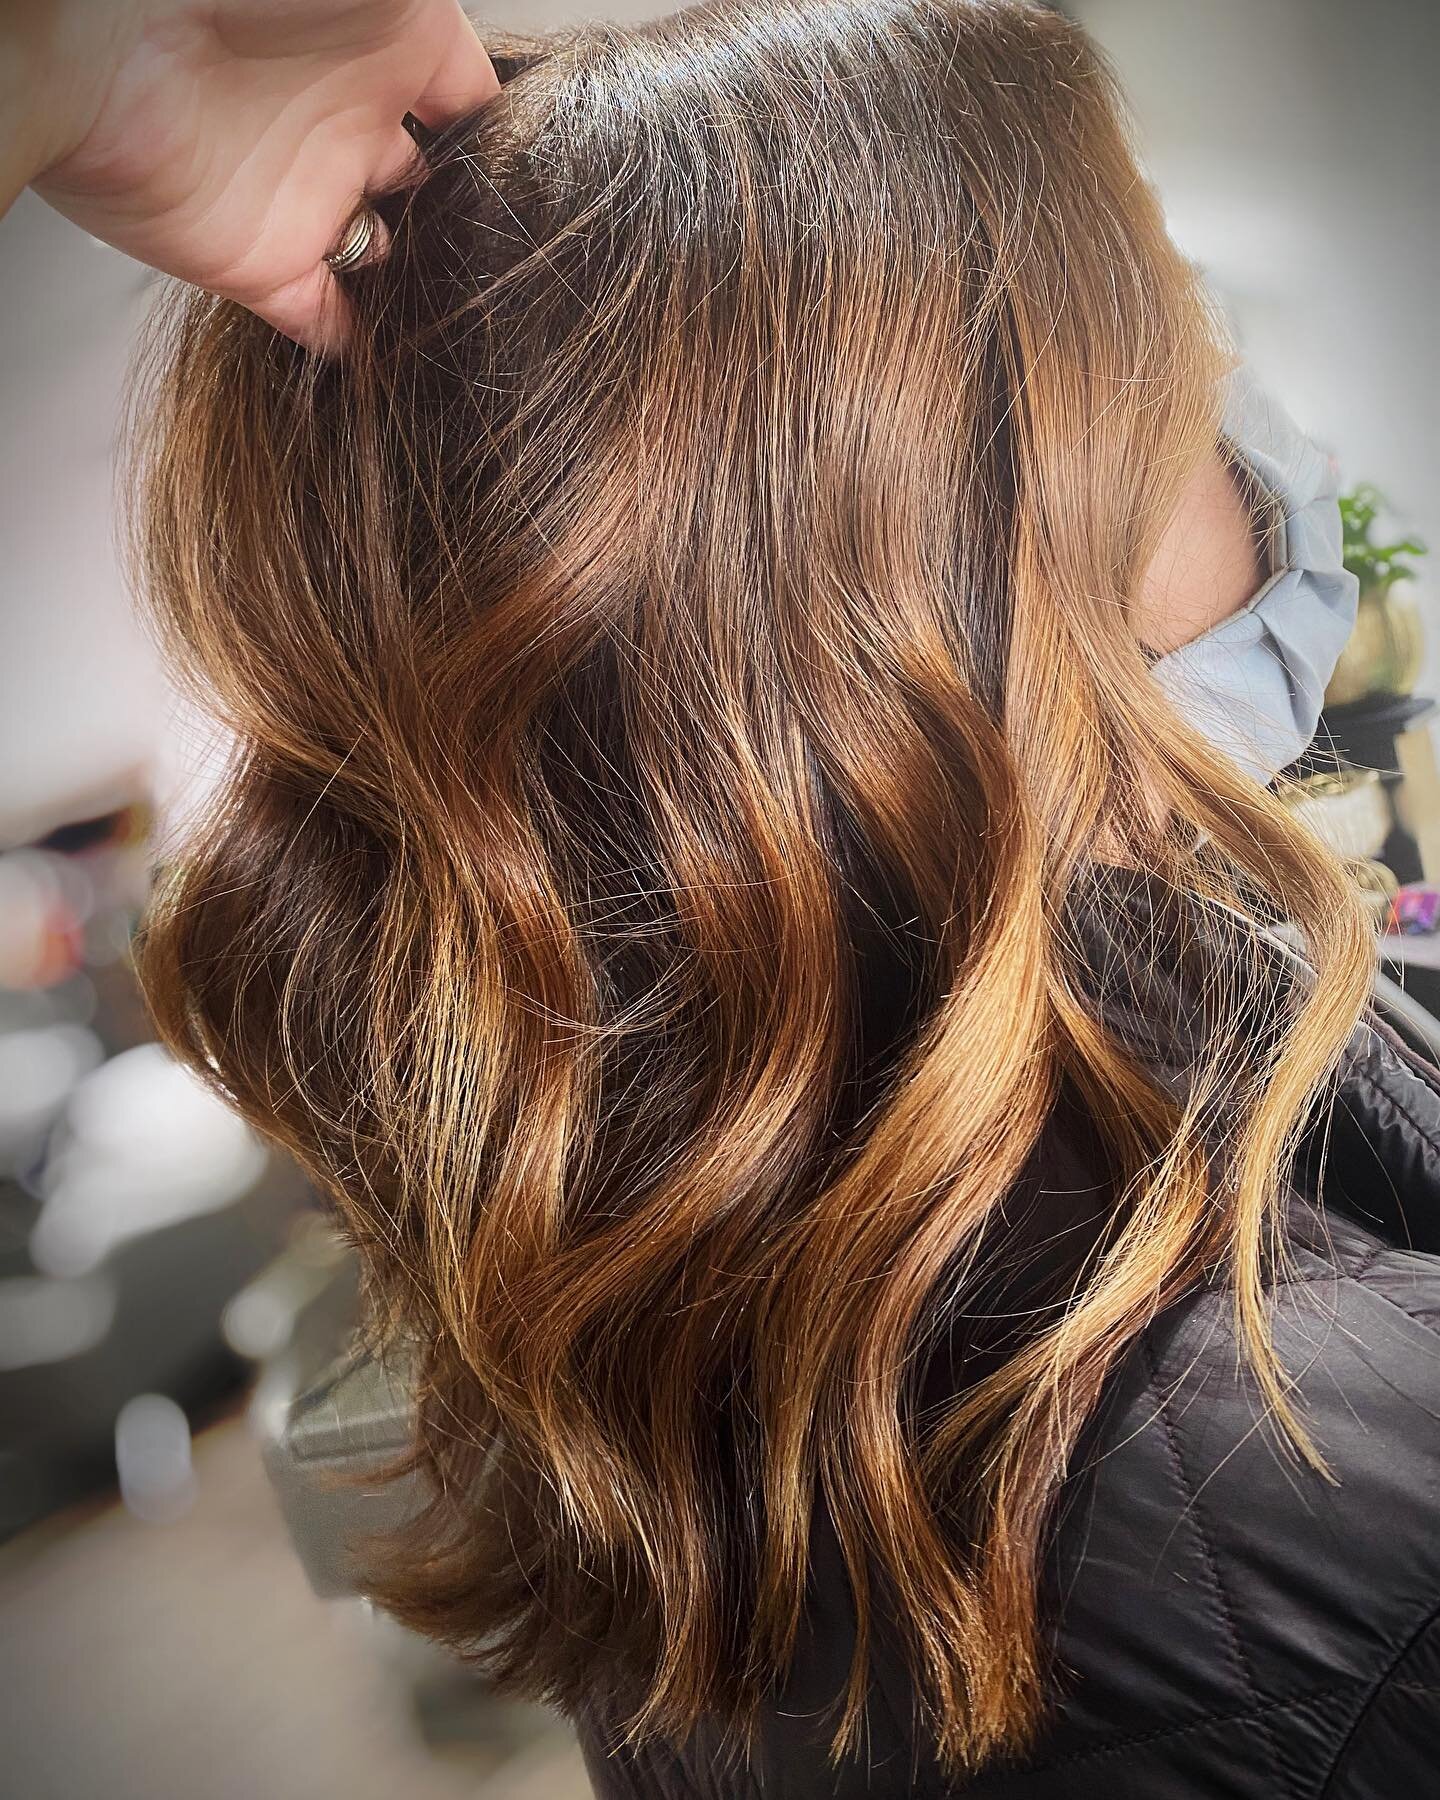 Check the dimension.
&bull;
&bull;
We used @wellahair at the root, @pulpriothair lightner for an open air balayage, and @redken SEQ to tone. We styled with @randco and @bioionic_pro.
&bull;
&bull;
@mastersofbalayage @behindthechair_com